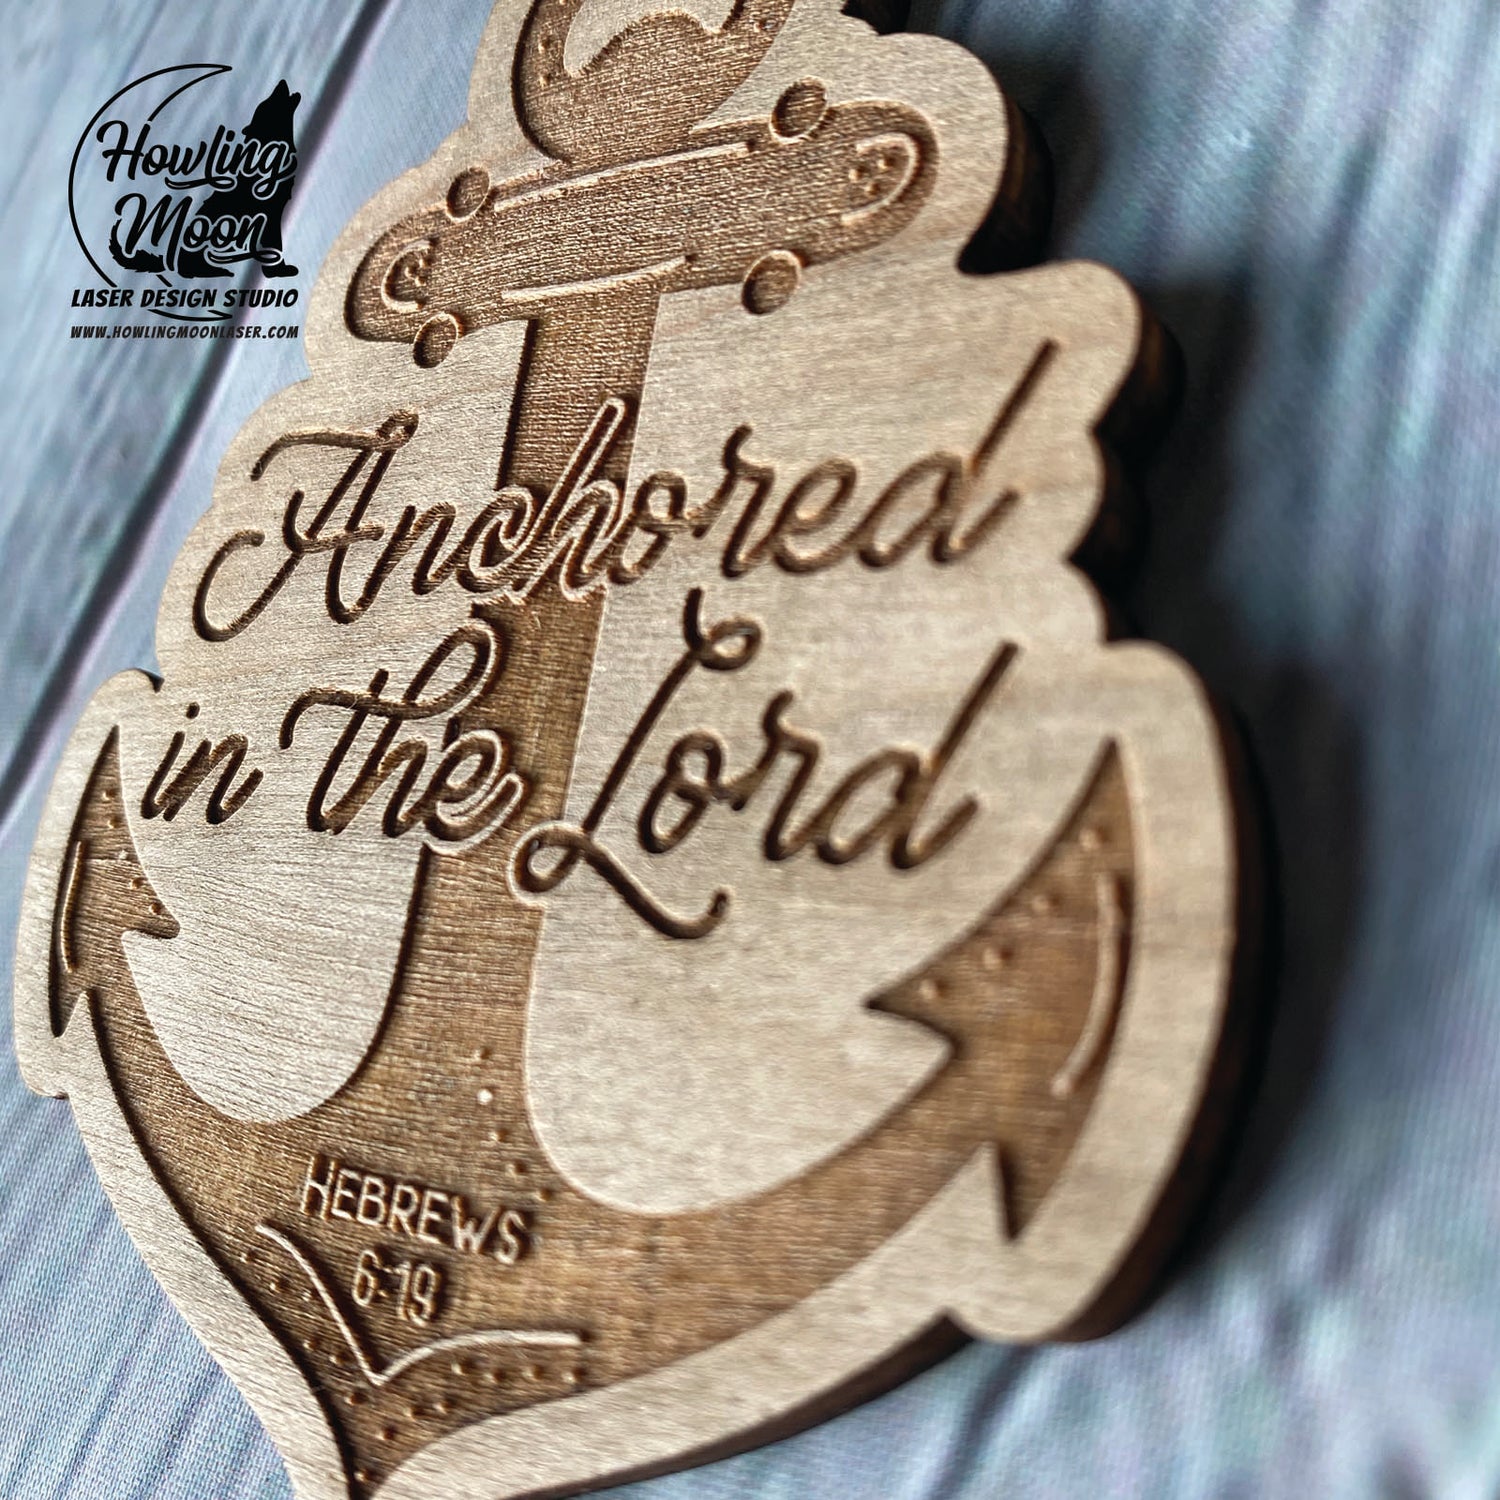 Anchored in the Lord Wood Engraved Ornament by Howling Moon Laser Design in Virginia, USA